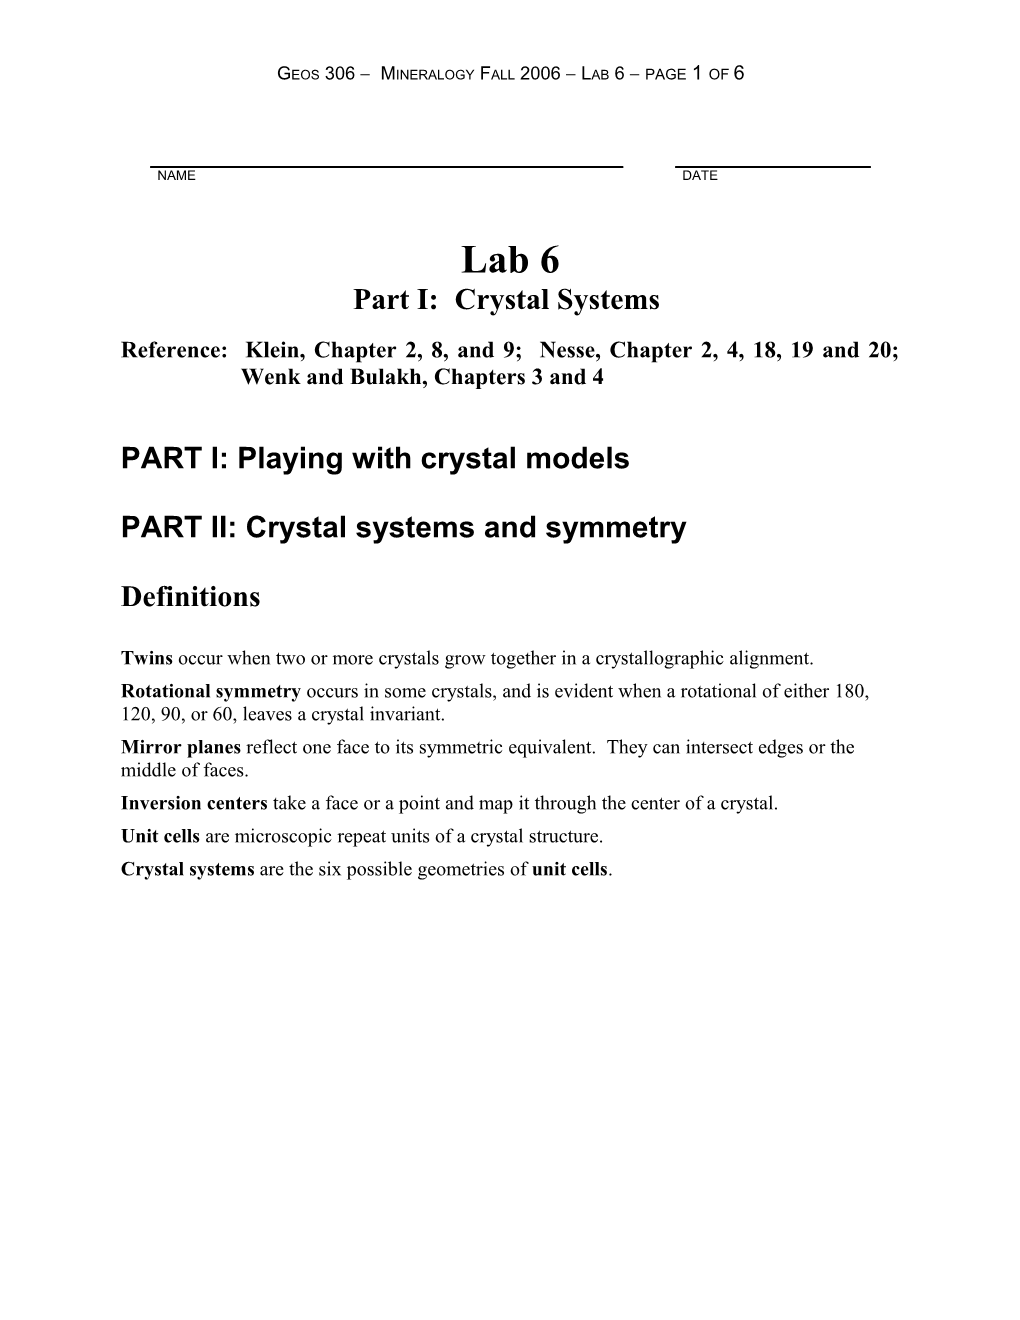 Geos 306 Mineralogy Fall 2006 Lab 6 PAGE1OF 6